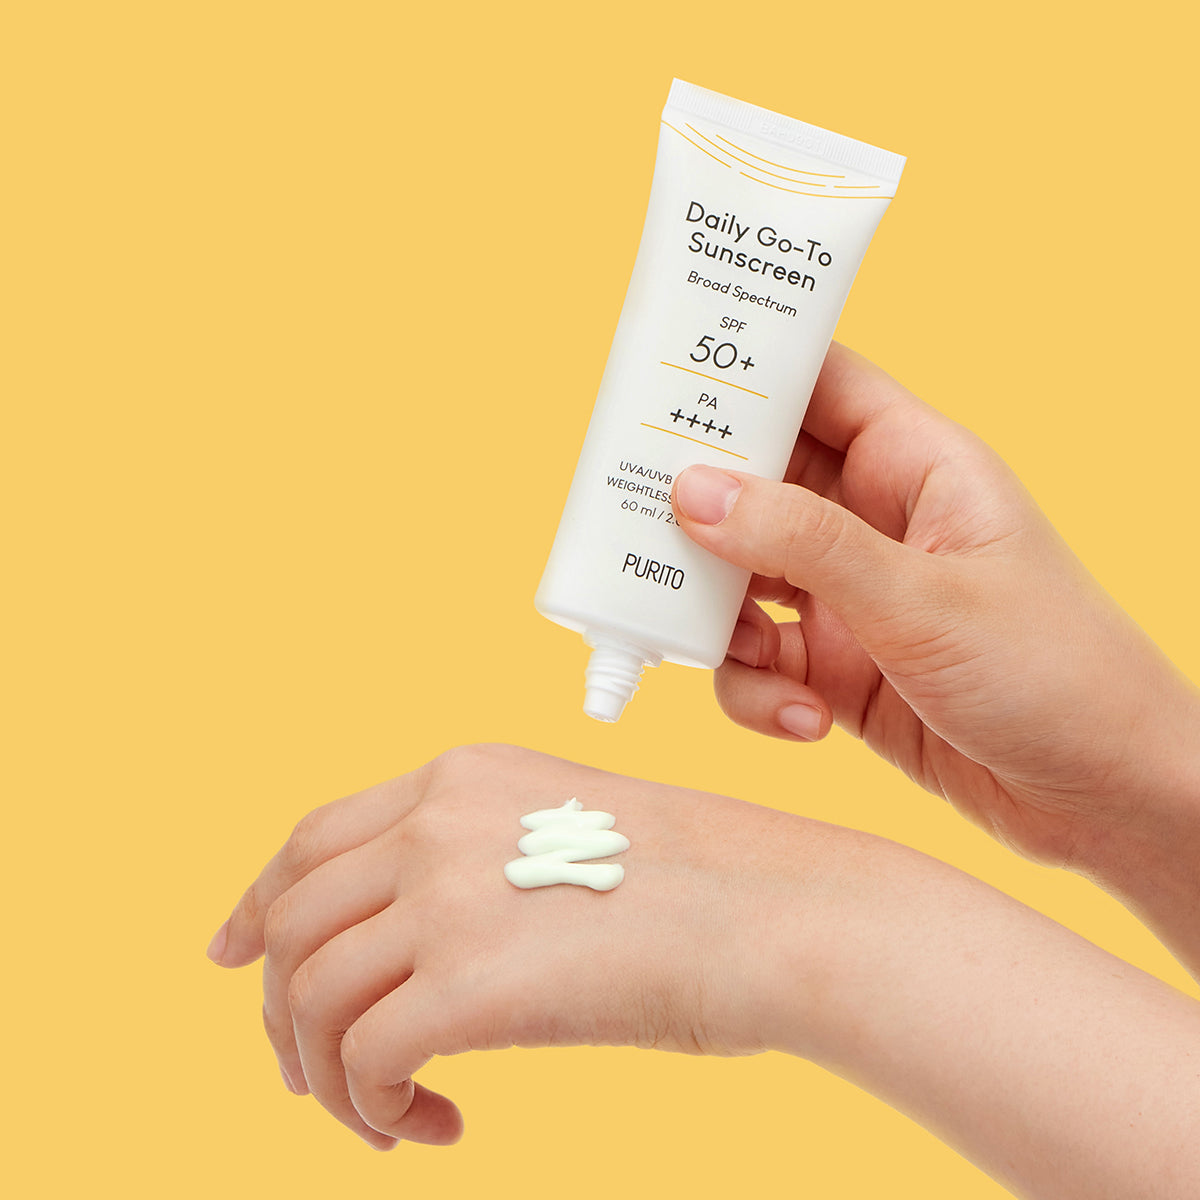 Daily Go-To Sunscreen SPF50+ Broad Spectrum